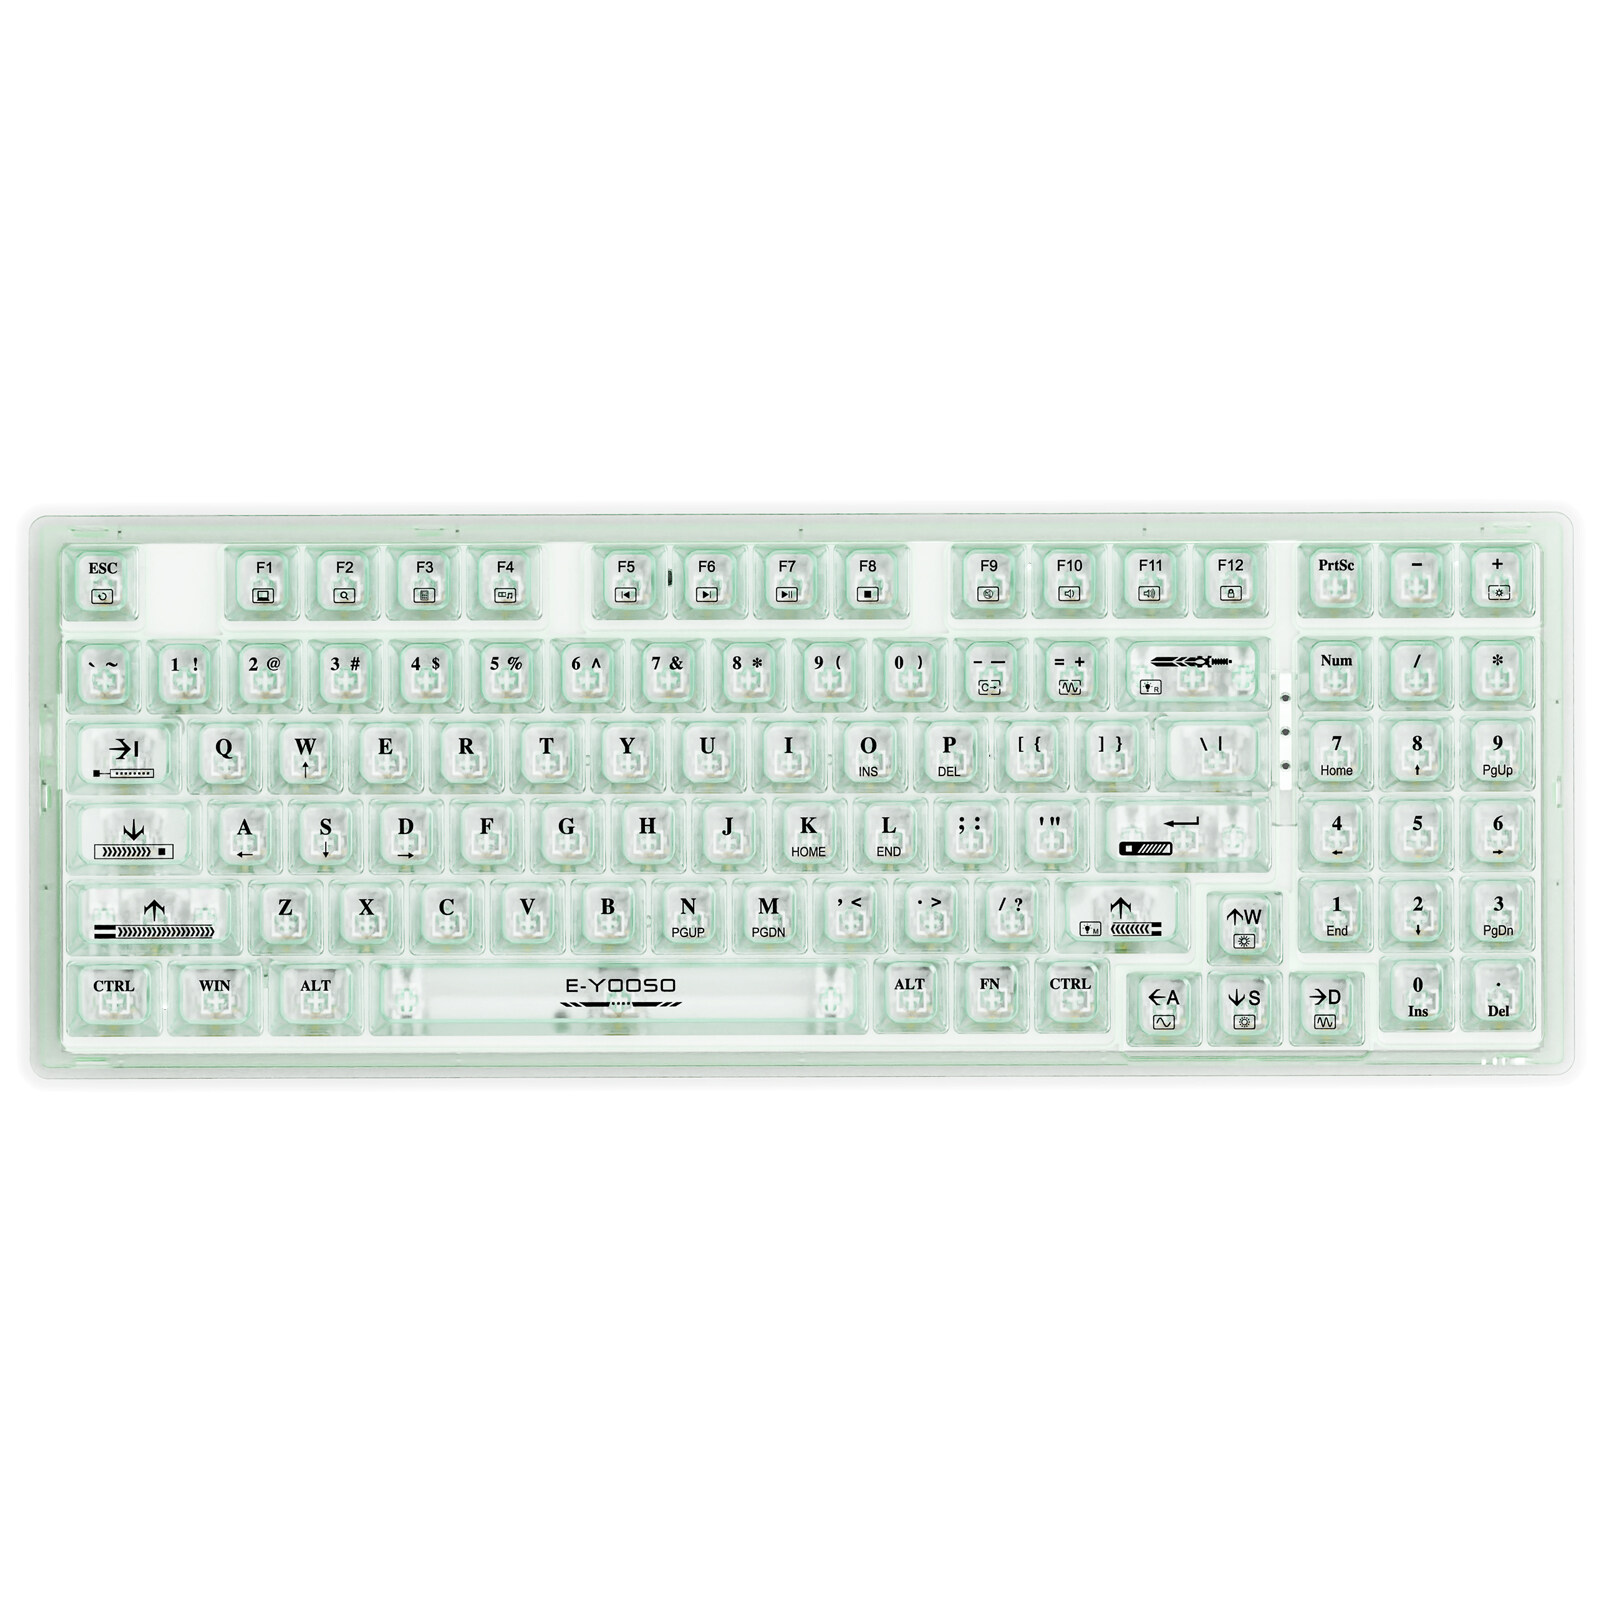 Z94 95% Gaming Keyboard Transparent PBT Keycaps,94 Keys Red Switch USB Wired Mechanical Keyboard with RGB Side Light